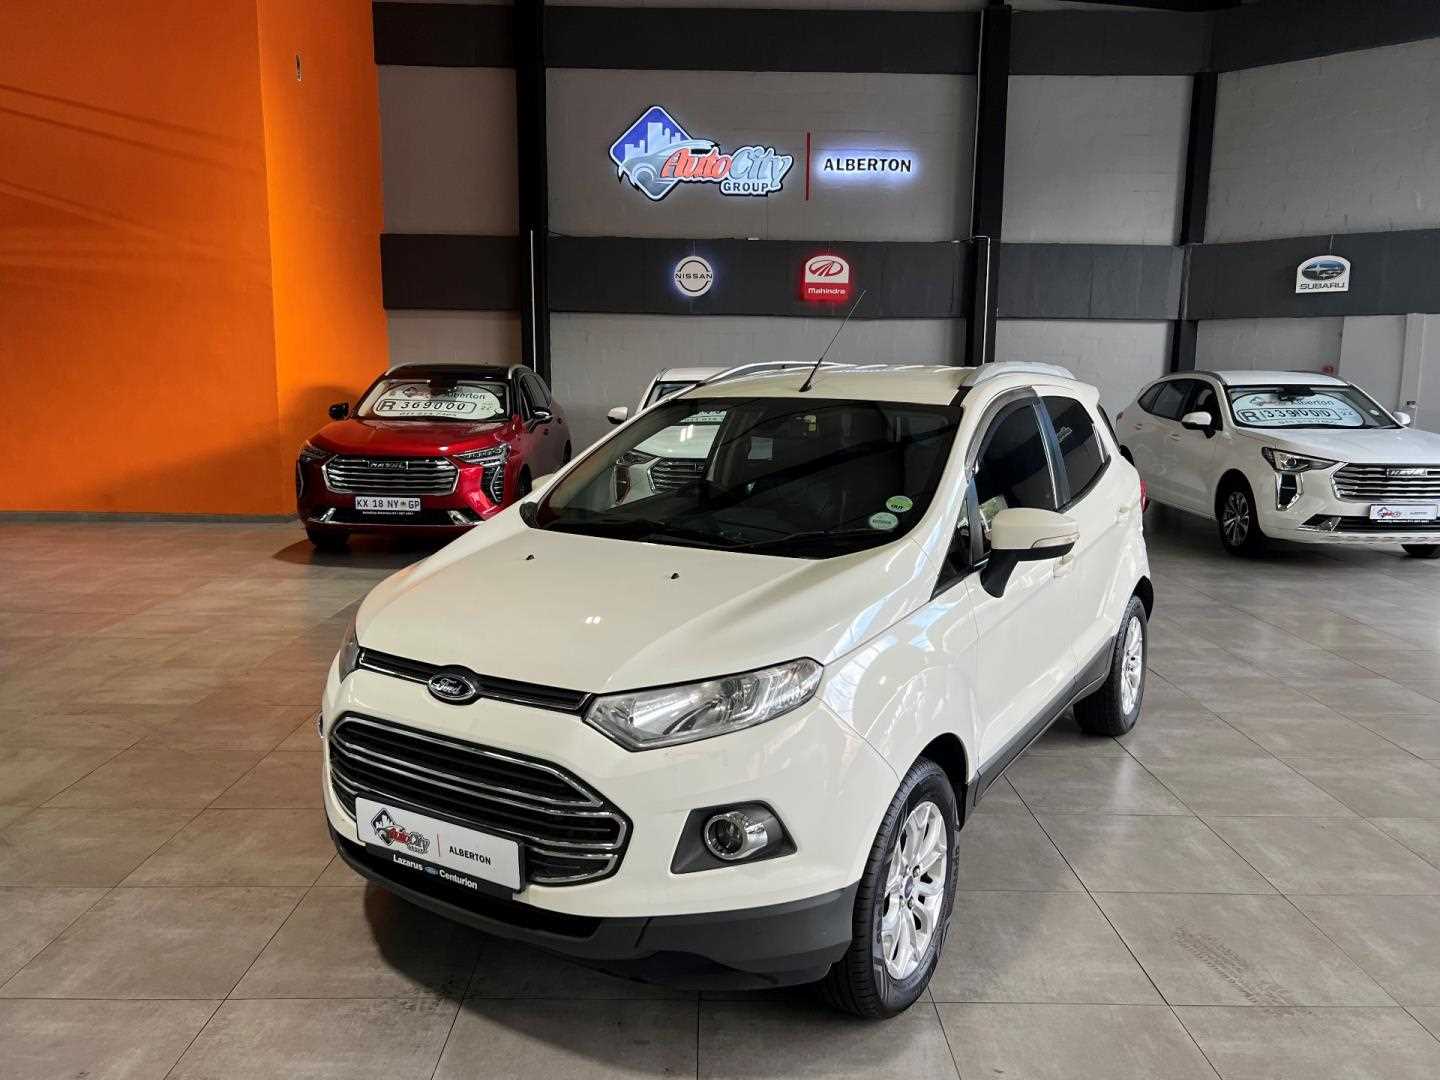 FORD ECOSPORT 1.5TDCi TITANIUM for Sale in South Africa